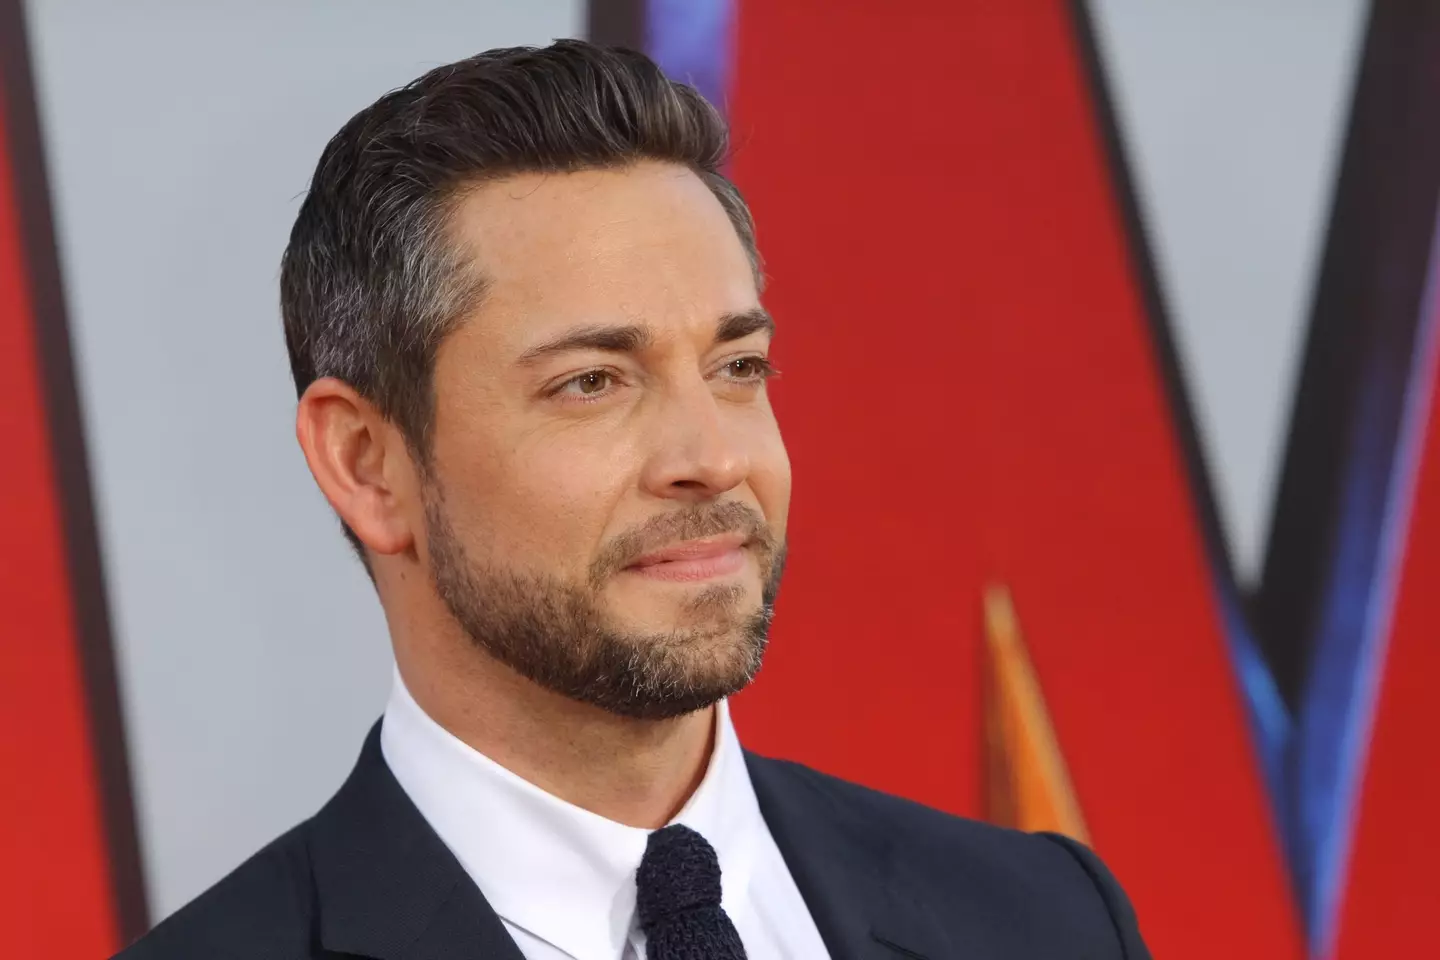 Zachary Levi has been warned by followers over a misleading tweet.